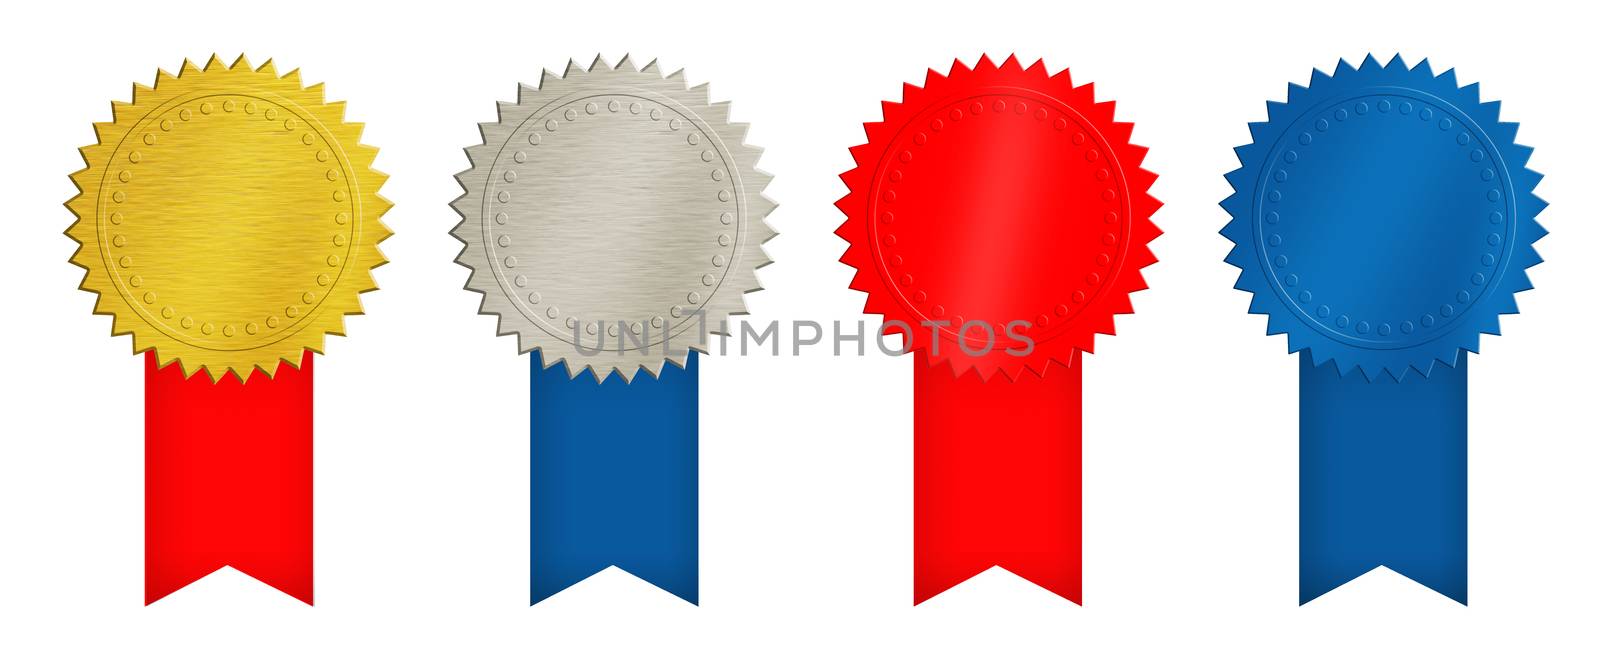 Set of four seal stamps, achievement and award badges (brushed metal gold, silver, blue and red) with ribbons isolated on white background